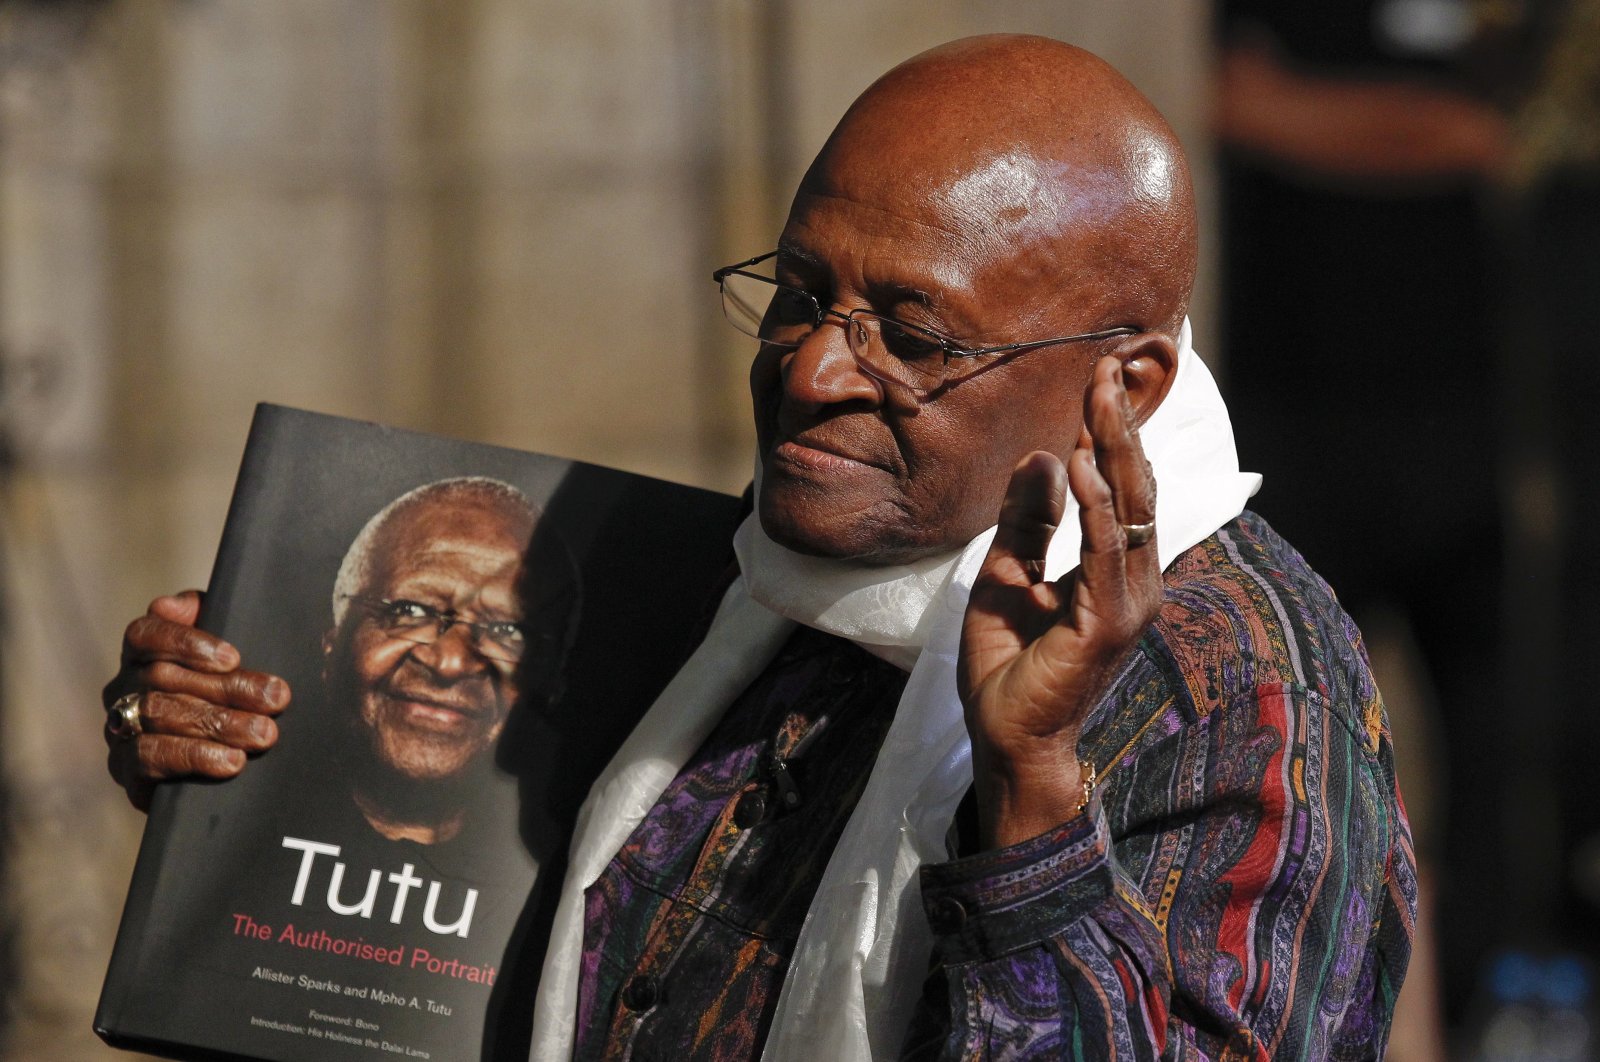 Former South African Archbishop Desmond Tutu poses with a copy of the book &#039;Tutu: The Authorised Portrait&#039; during an event for the book launch in Cape Town, South Africa, Oct. 6, 2011. (EPA Photo)